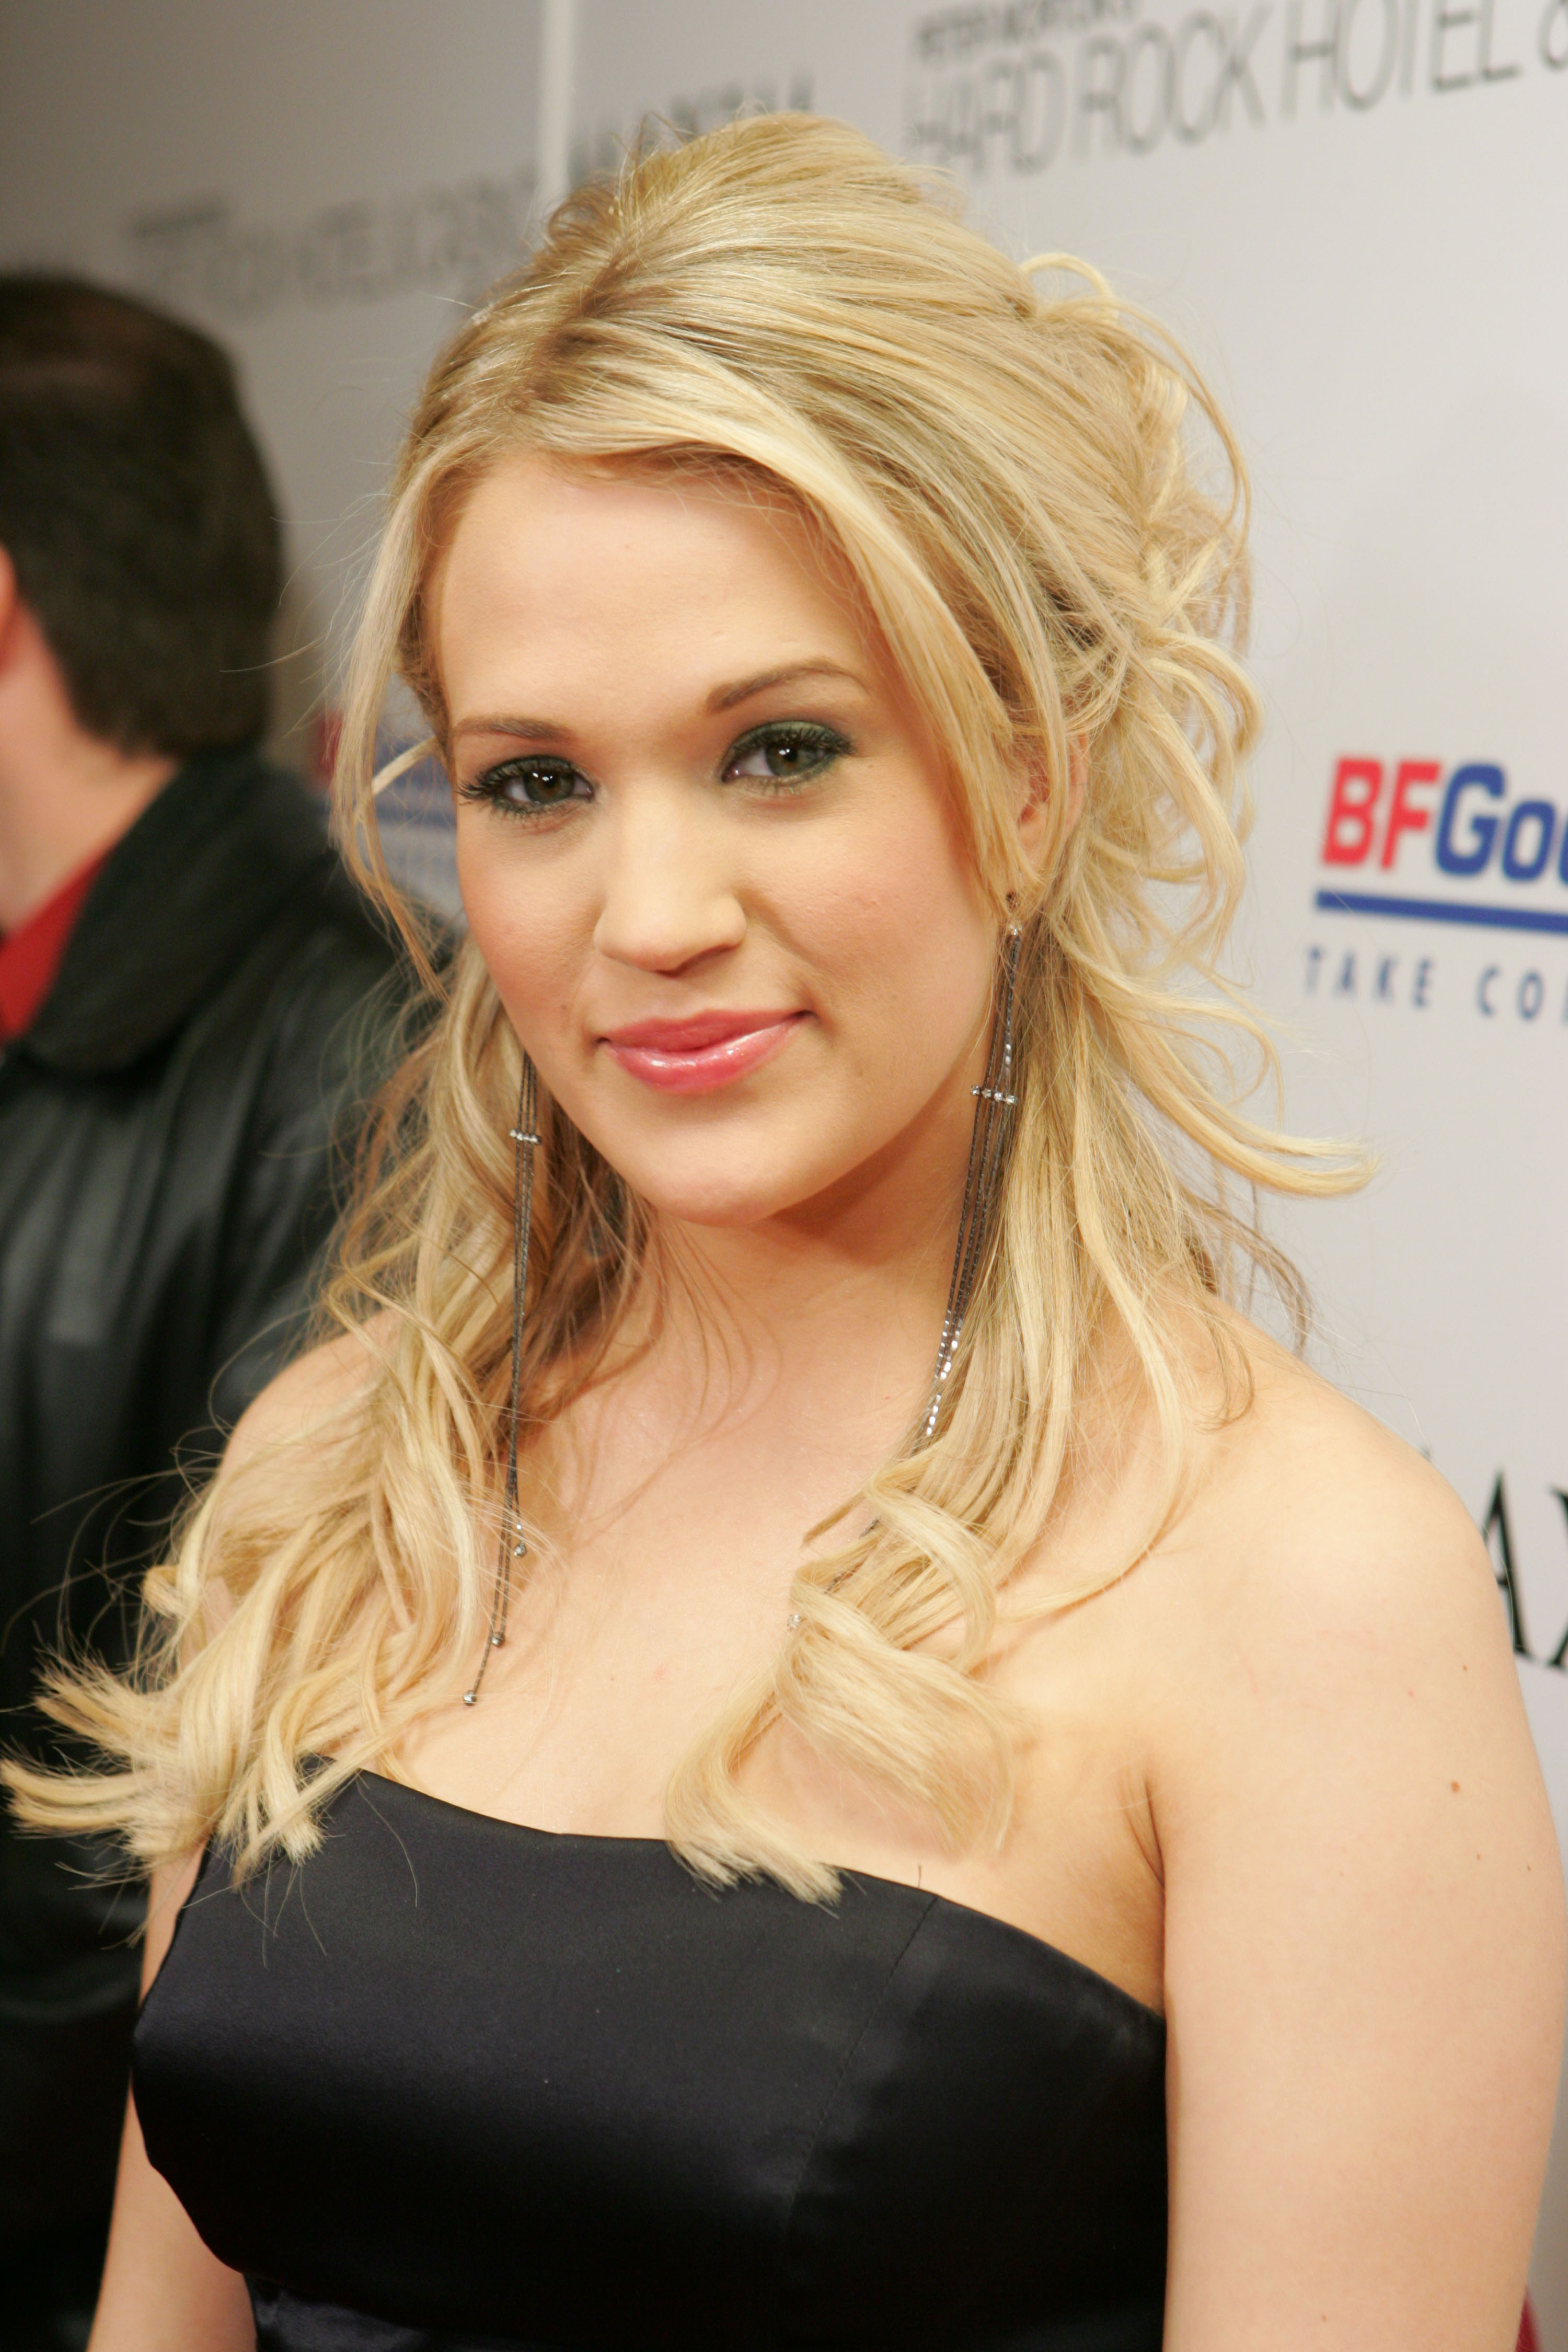 Hollywood star during 2005 Billboard Music Awards Maxim after party at Body English at The Hard Rock Hotel and Casino on December 6, 2010 in Las Vegas, Nevada